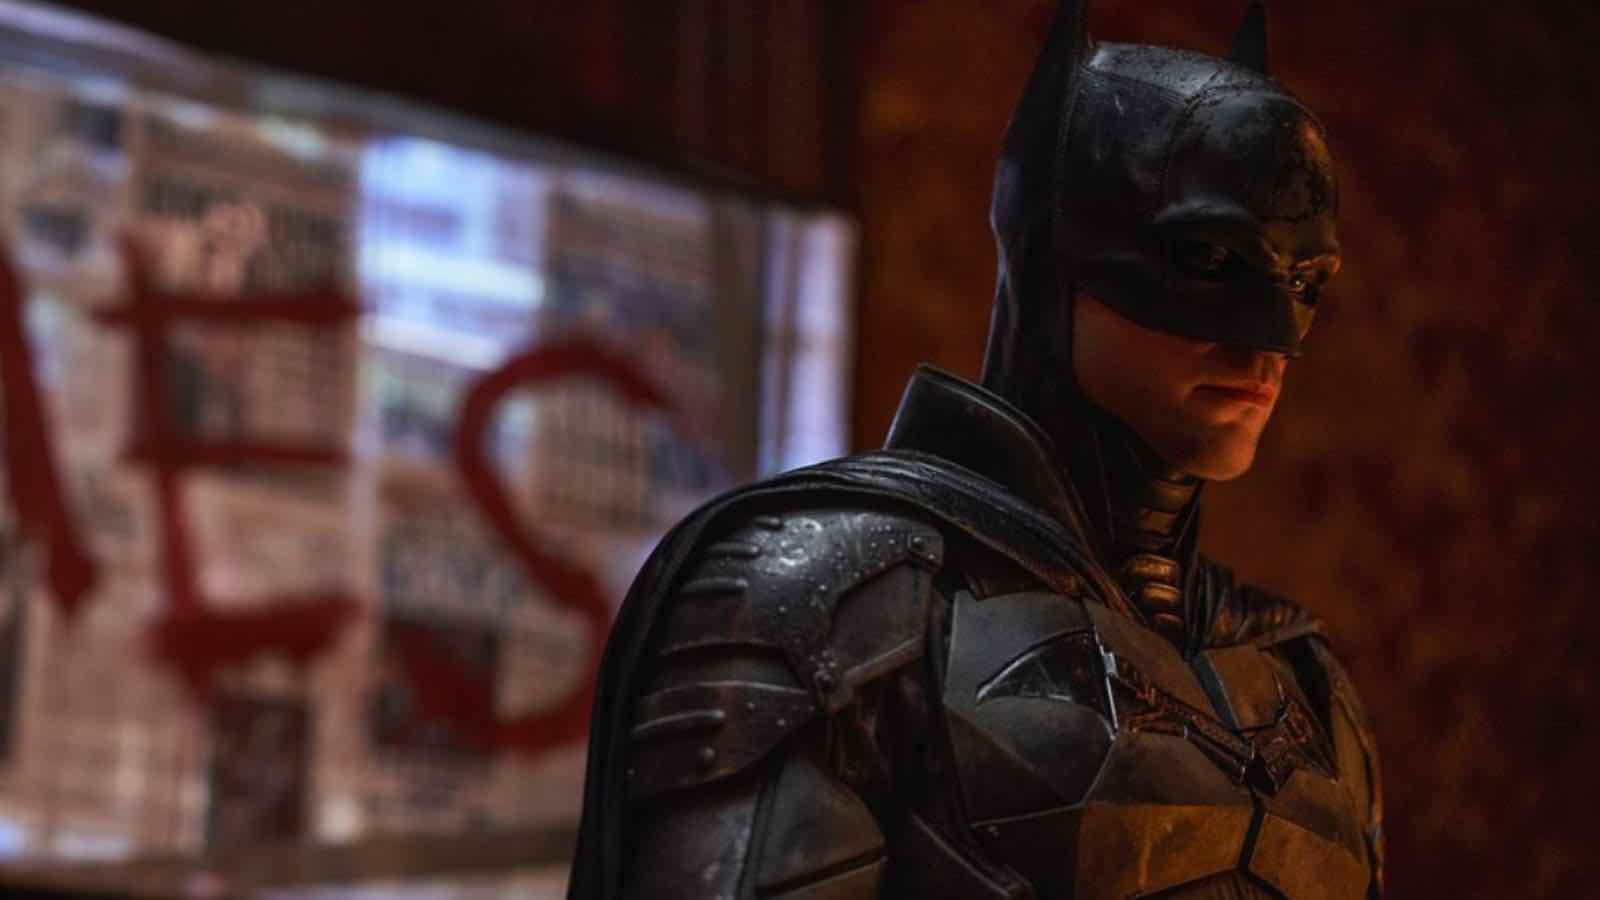 Watch ‘The Batman’ (2022) Free online streaming At home